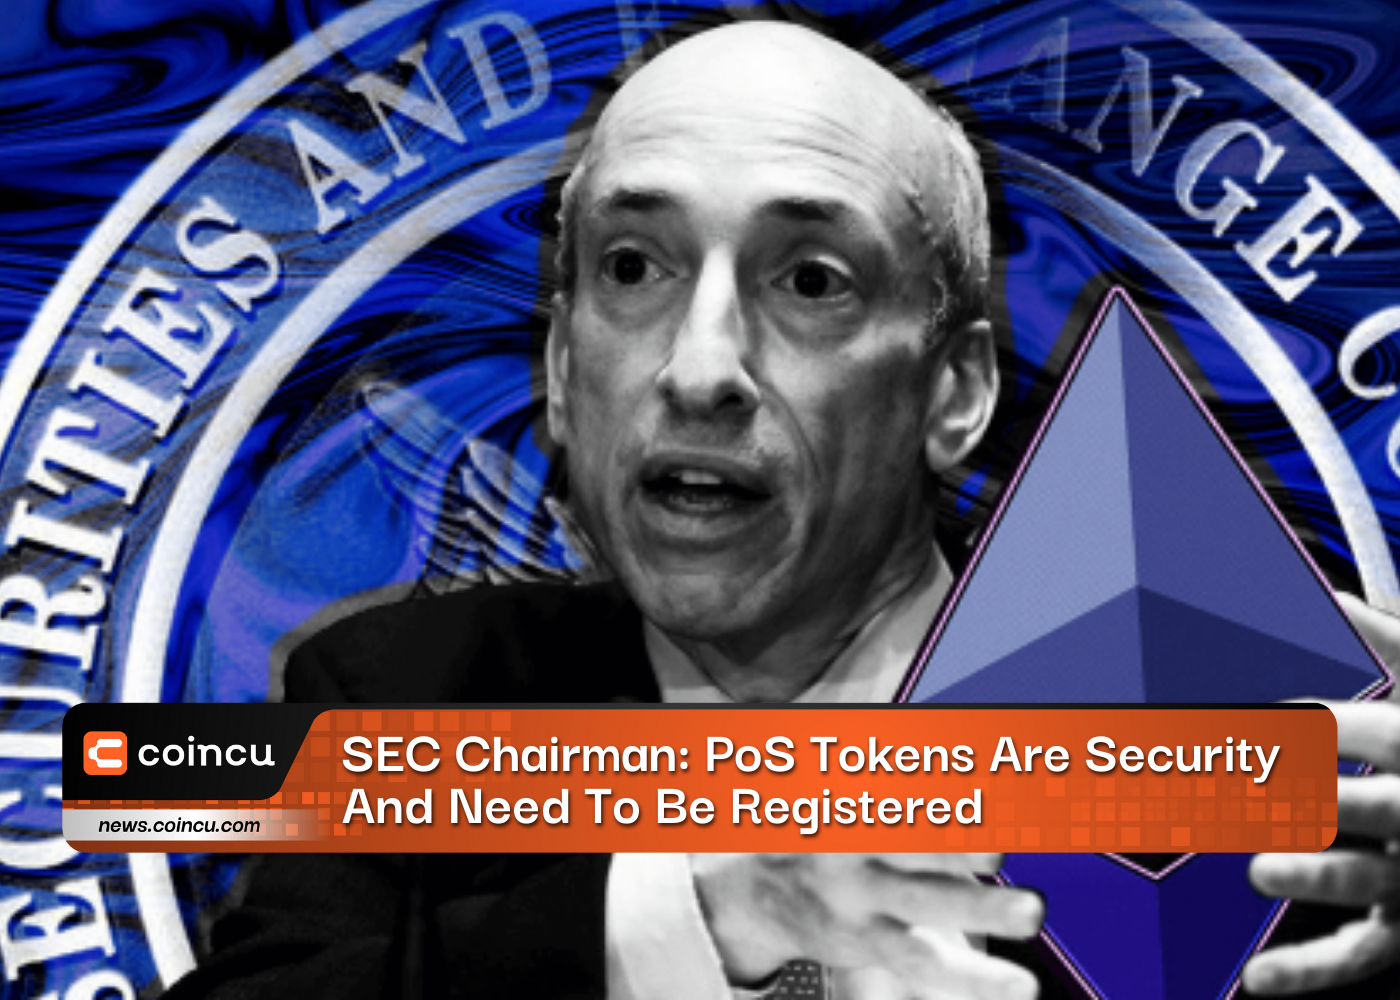 SEC Chairman: PoS Tokens Are Security And Need To Be Registered